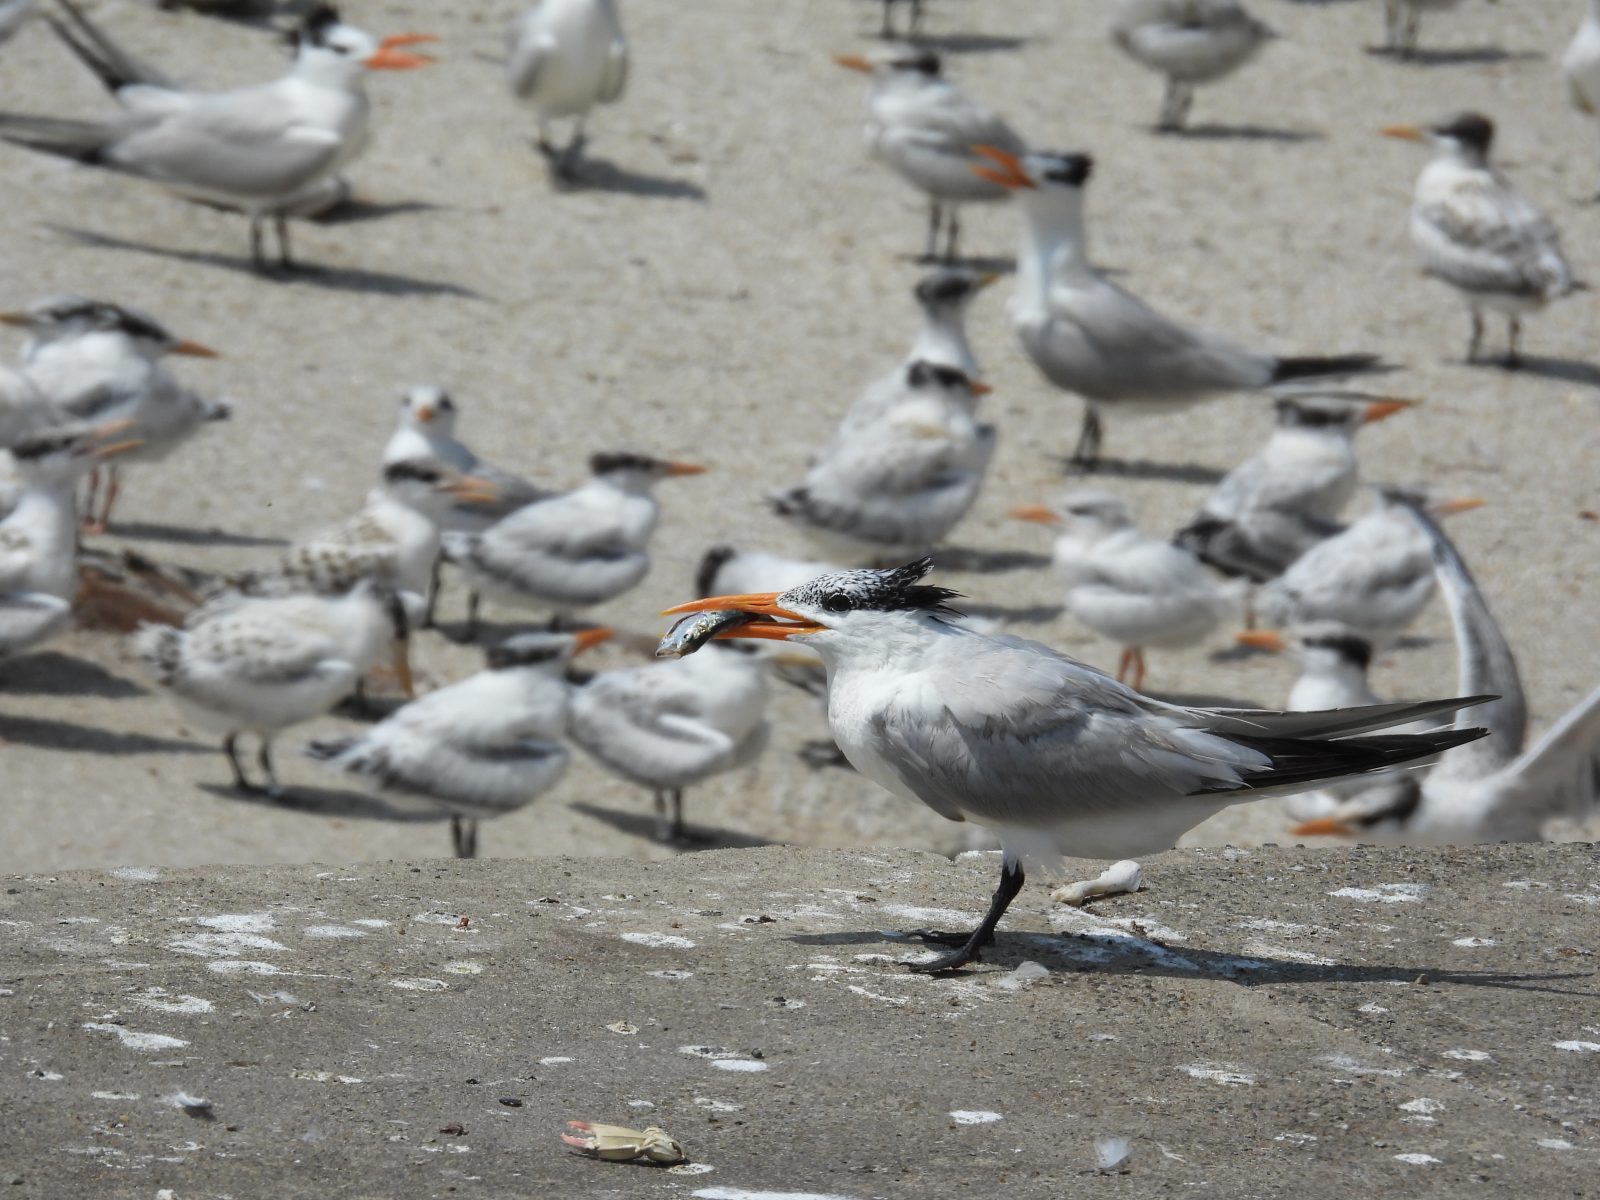 An adult royal tern with prey surveying the colony of birds below.